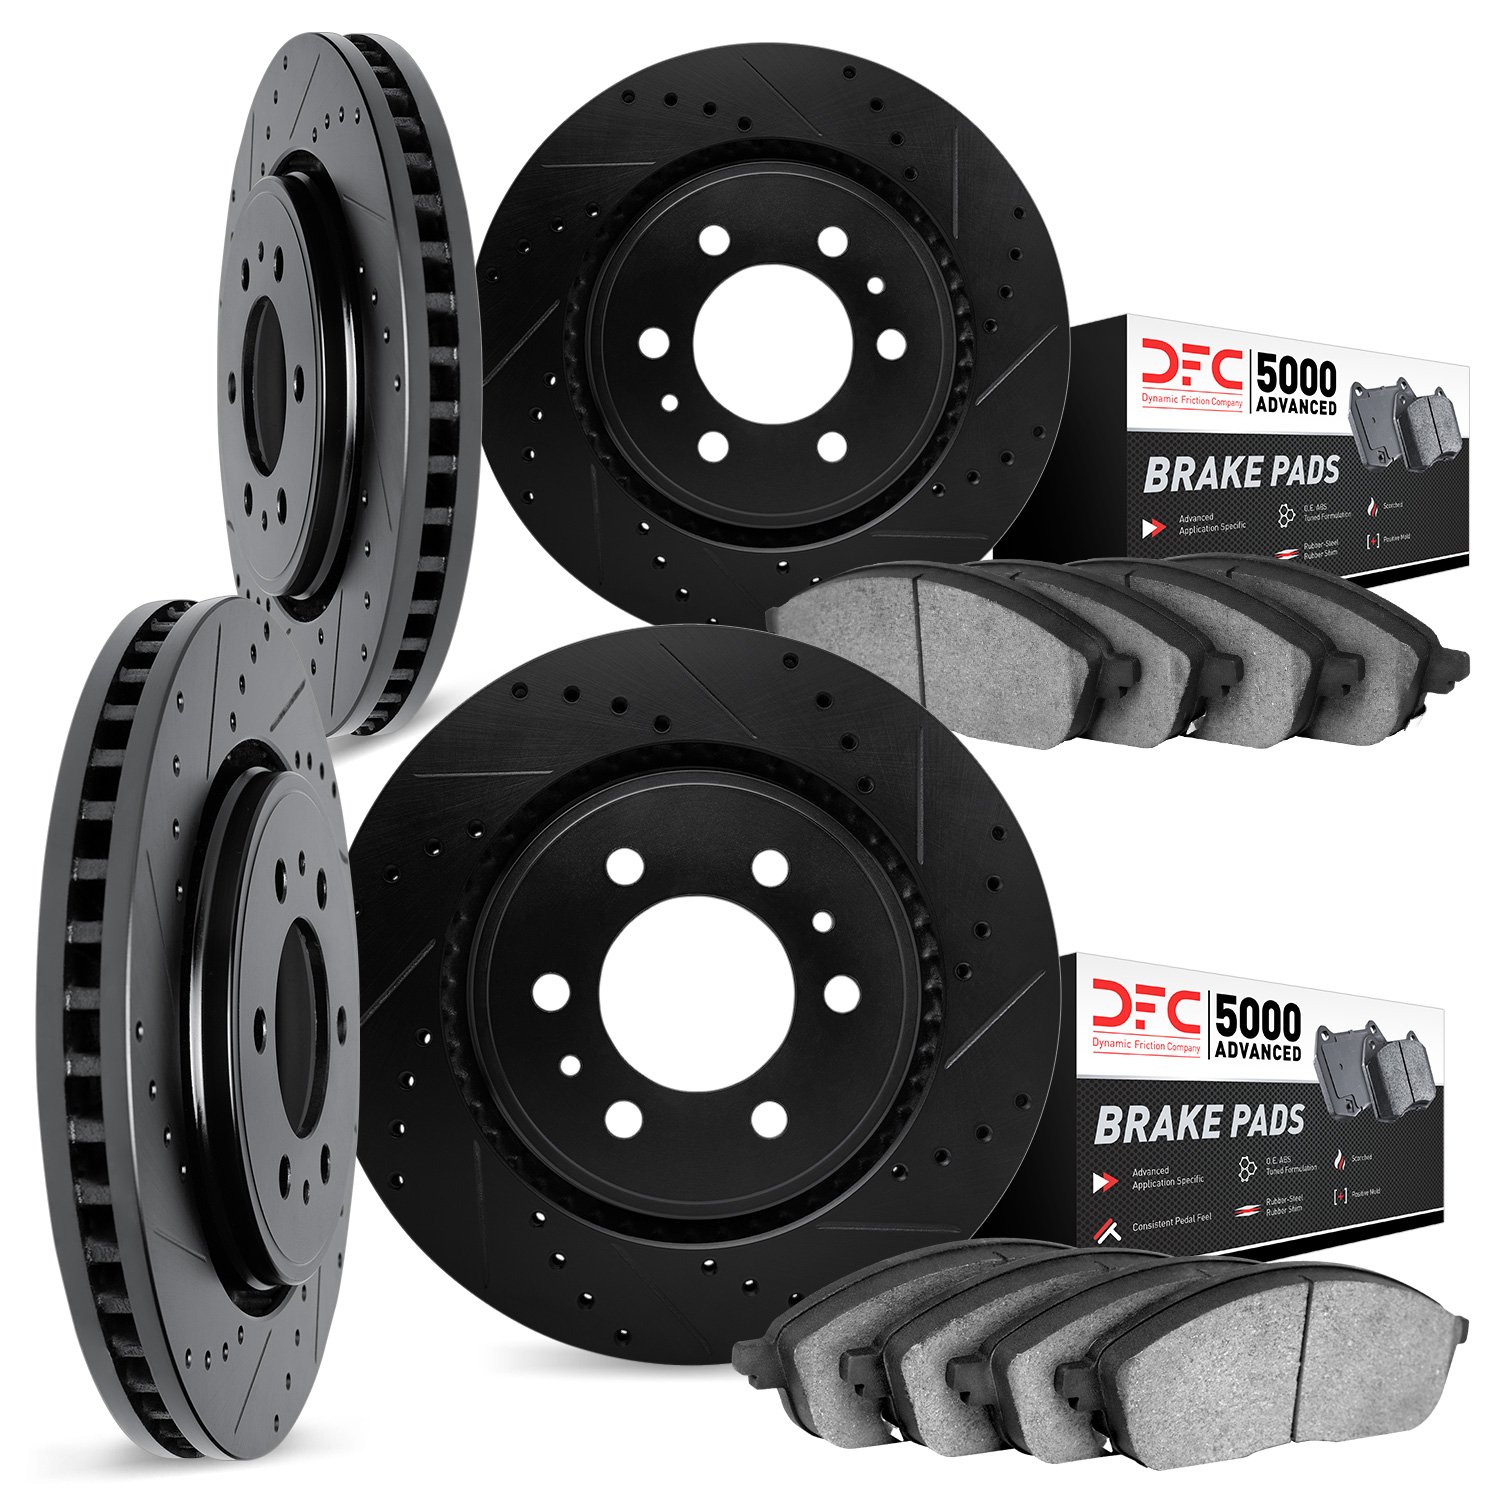 8504-48038 Drilled/Slotted Brake Rotors w/5000 Advanced Brake Pads Kit [Black], 2017-2020 GM, Position: Front and Rear